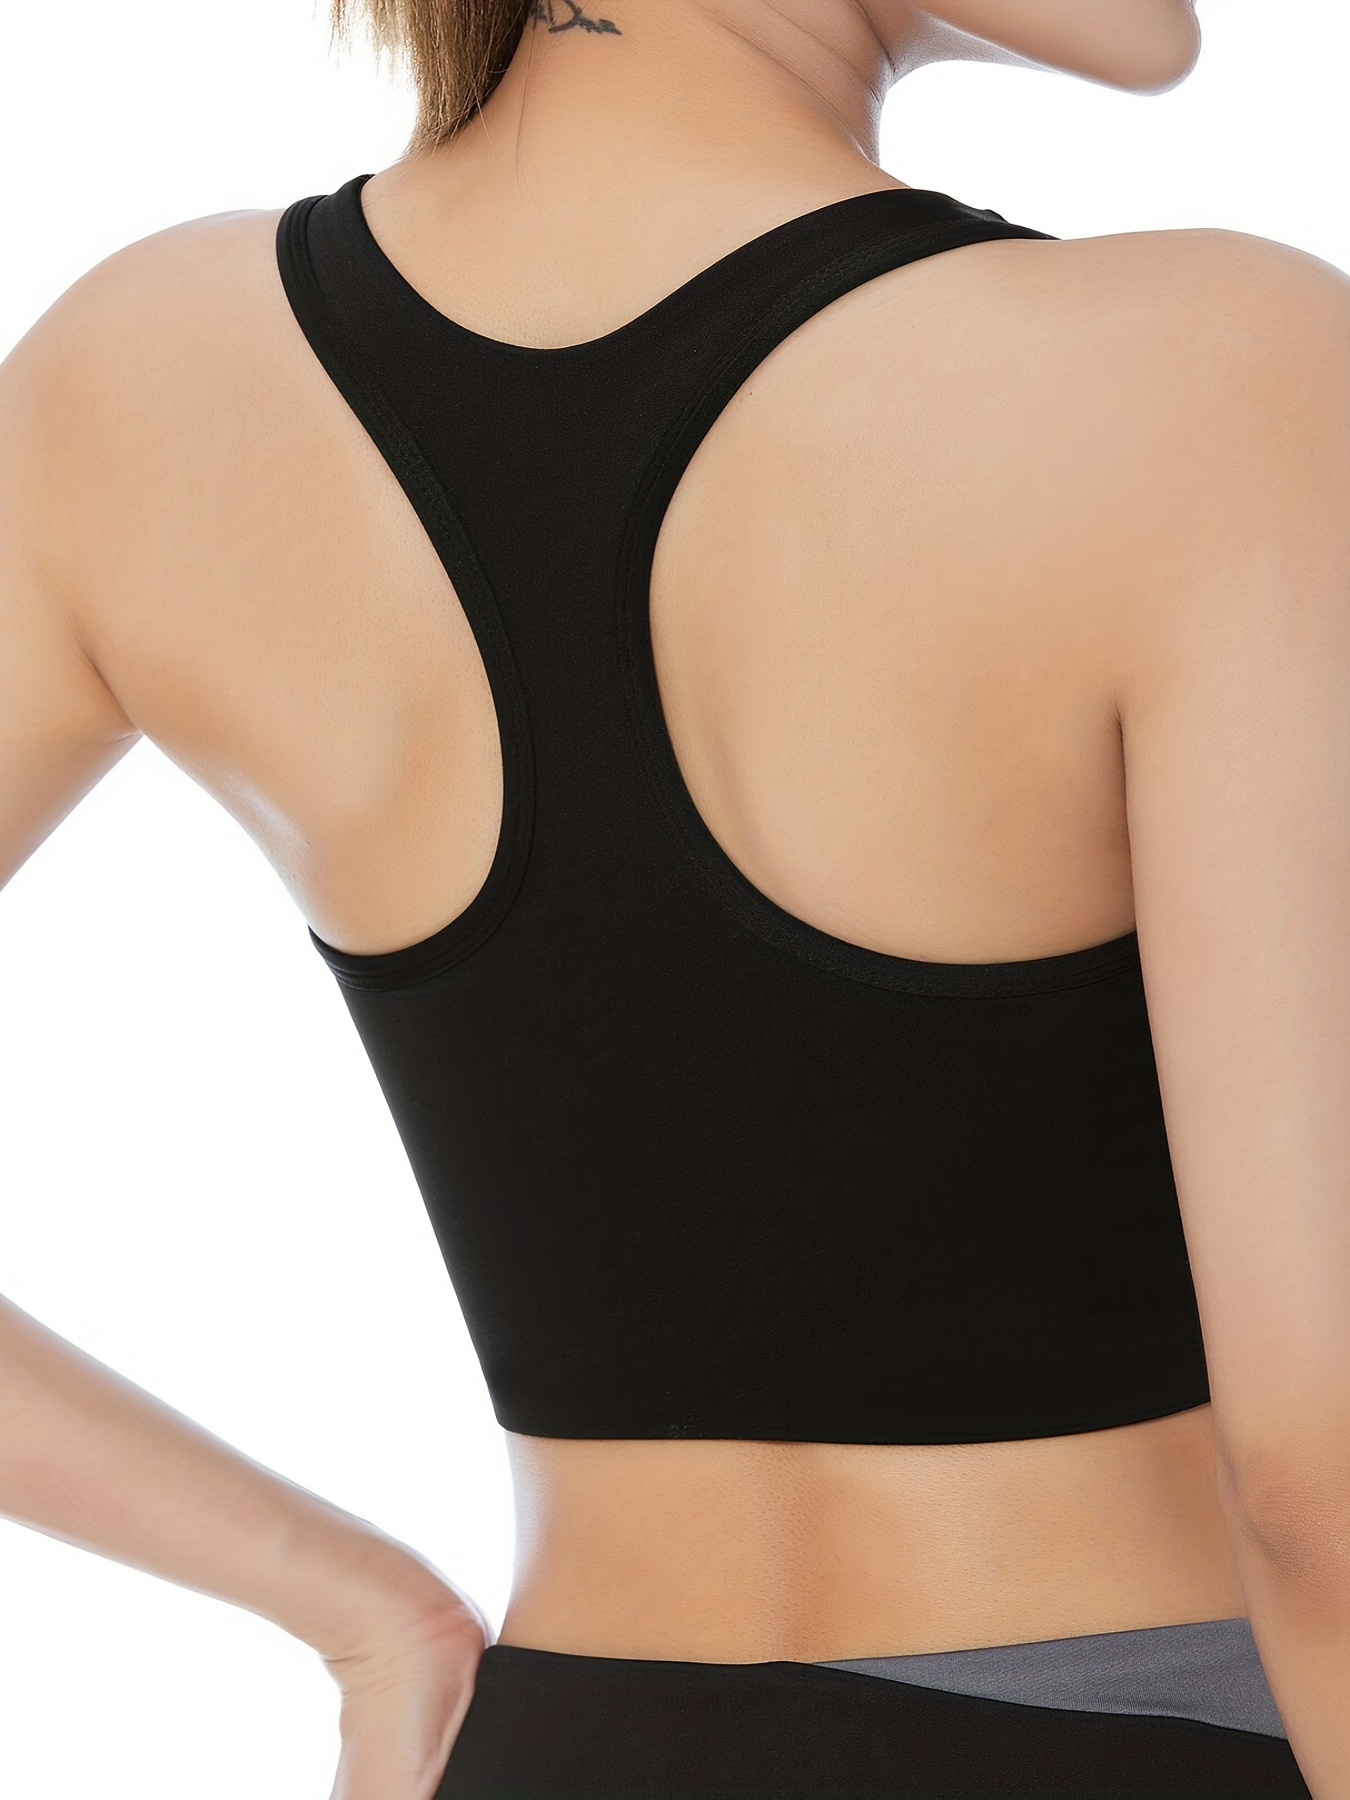 NEOSAN Womens Sport Bras High Neck Removable Padded Yoga Crop Tops